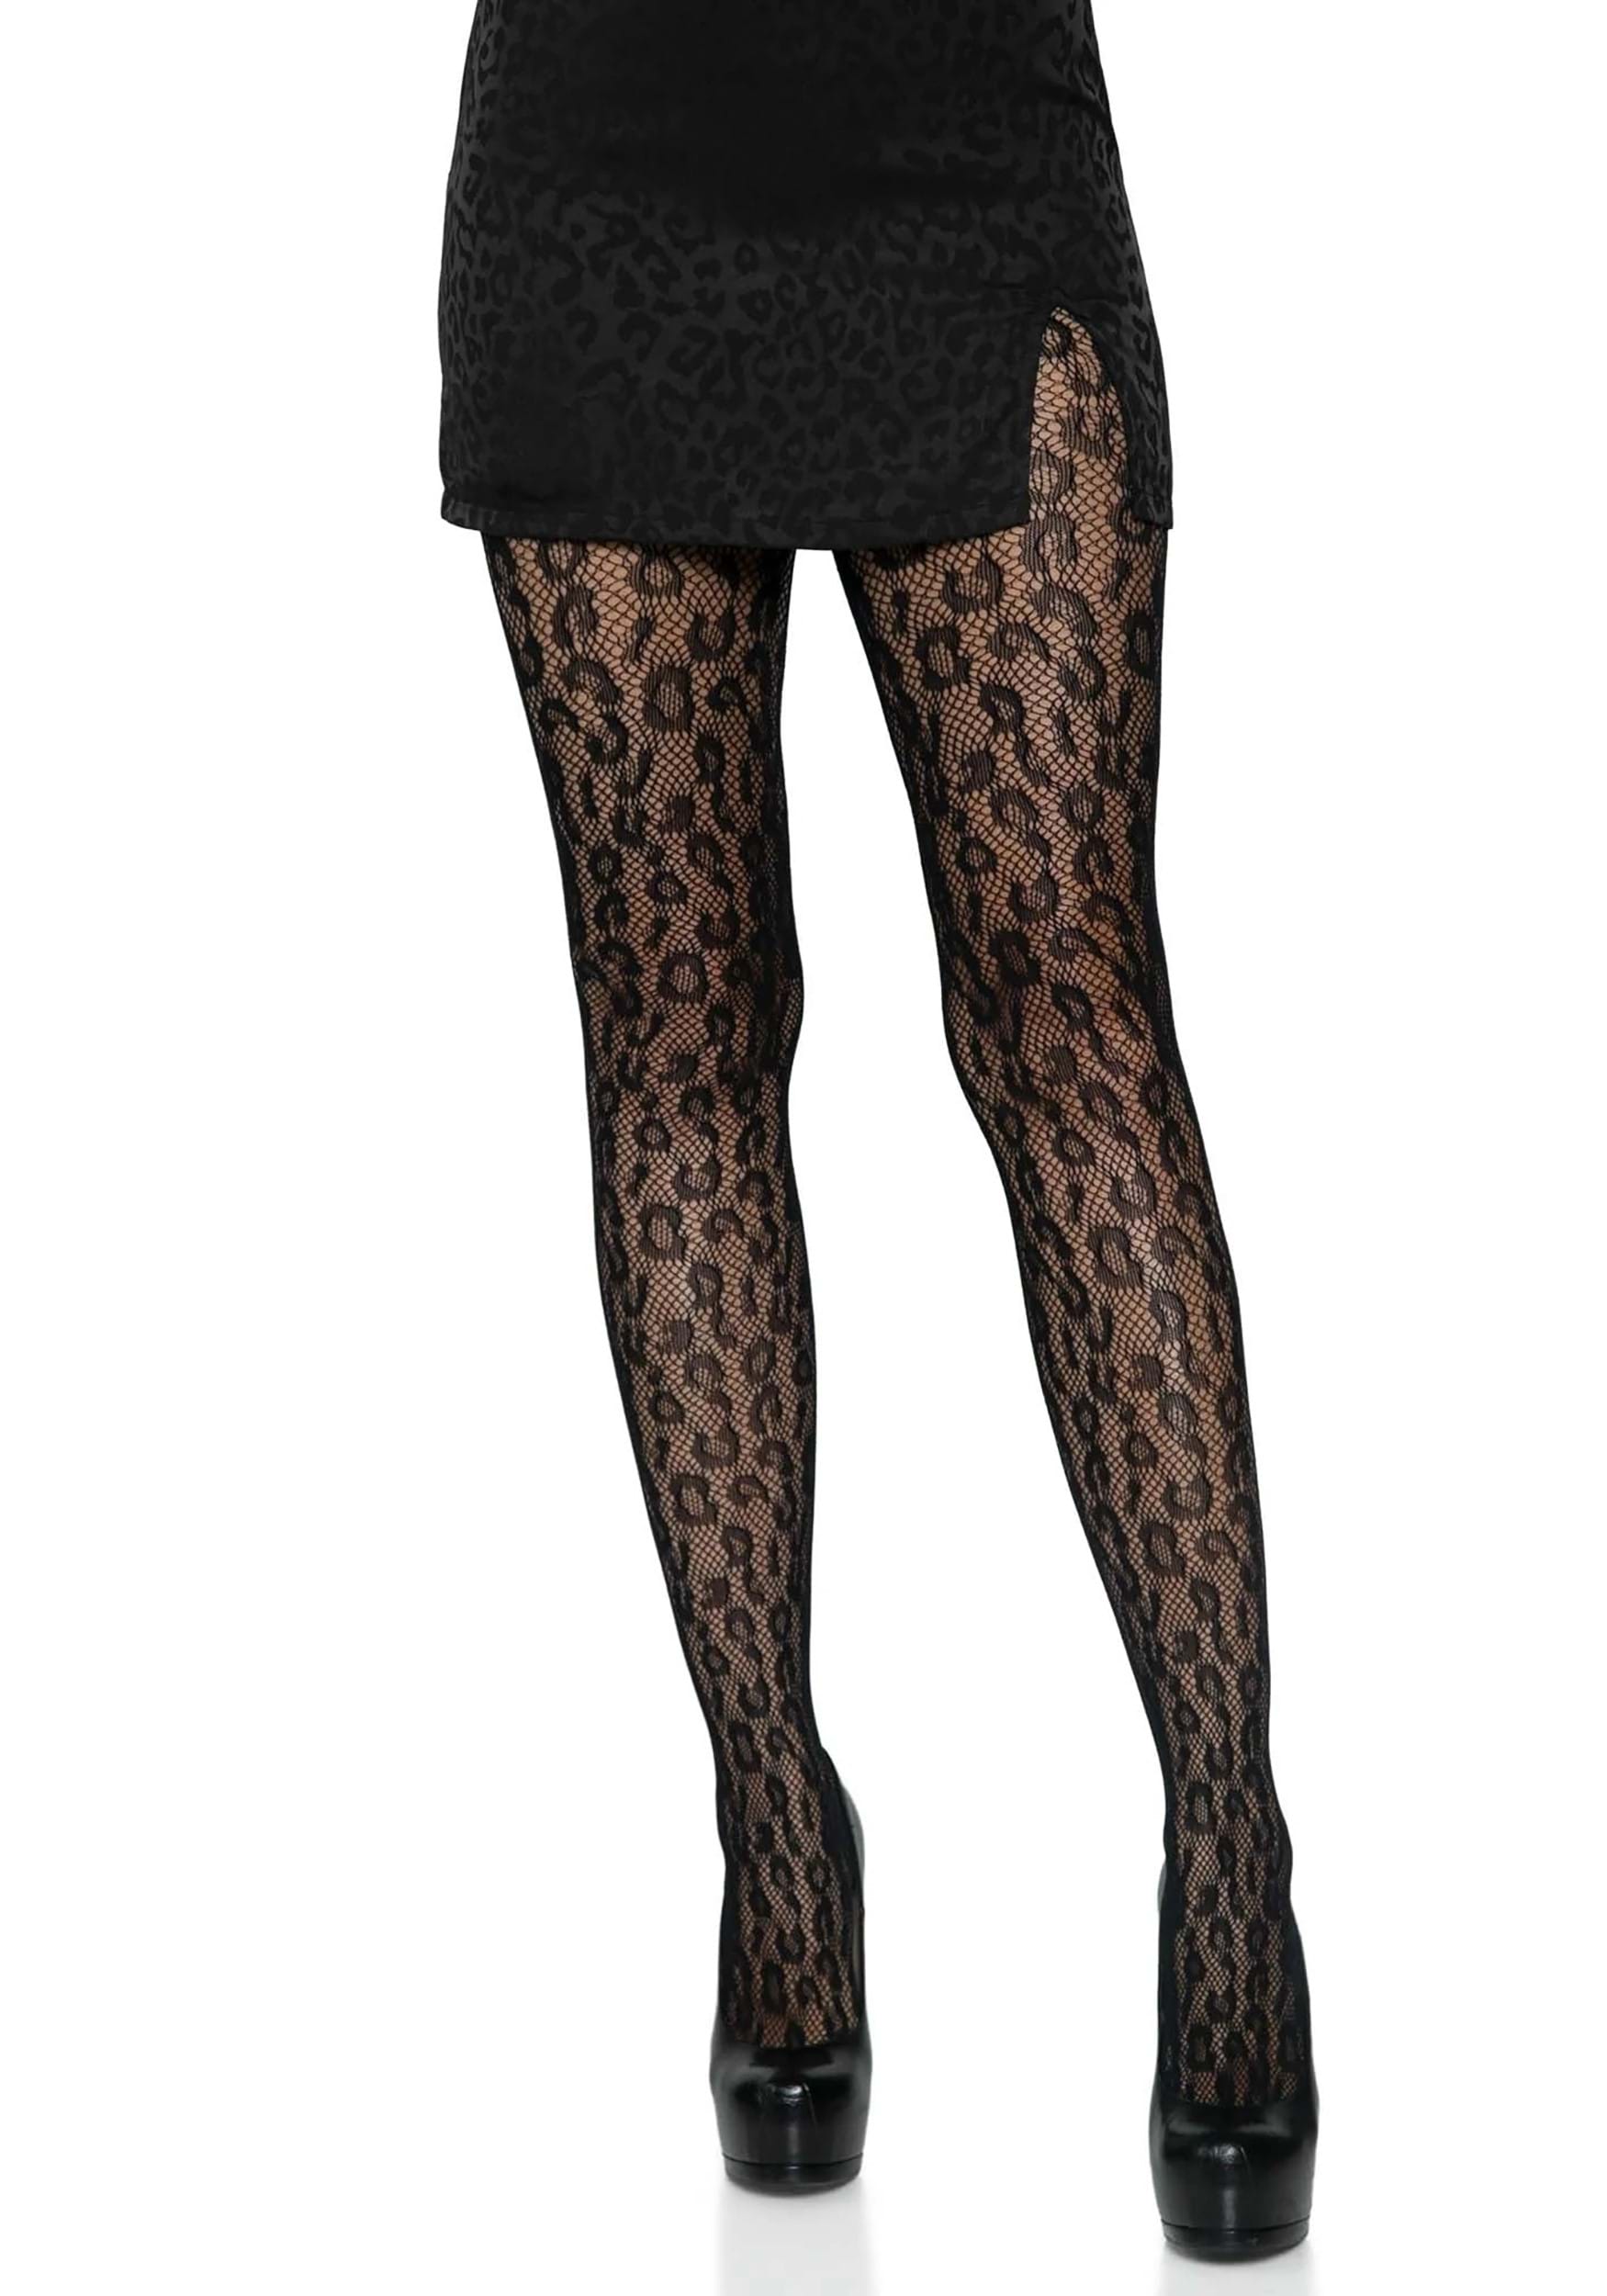 Black Tights Fishnet Stockings Leopard Lace Pantyhose suedehead